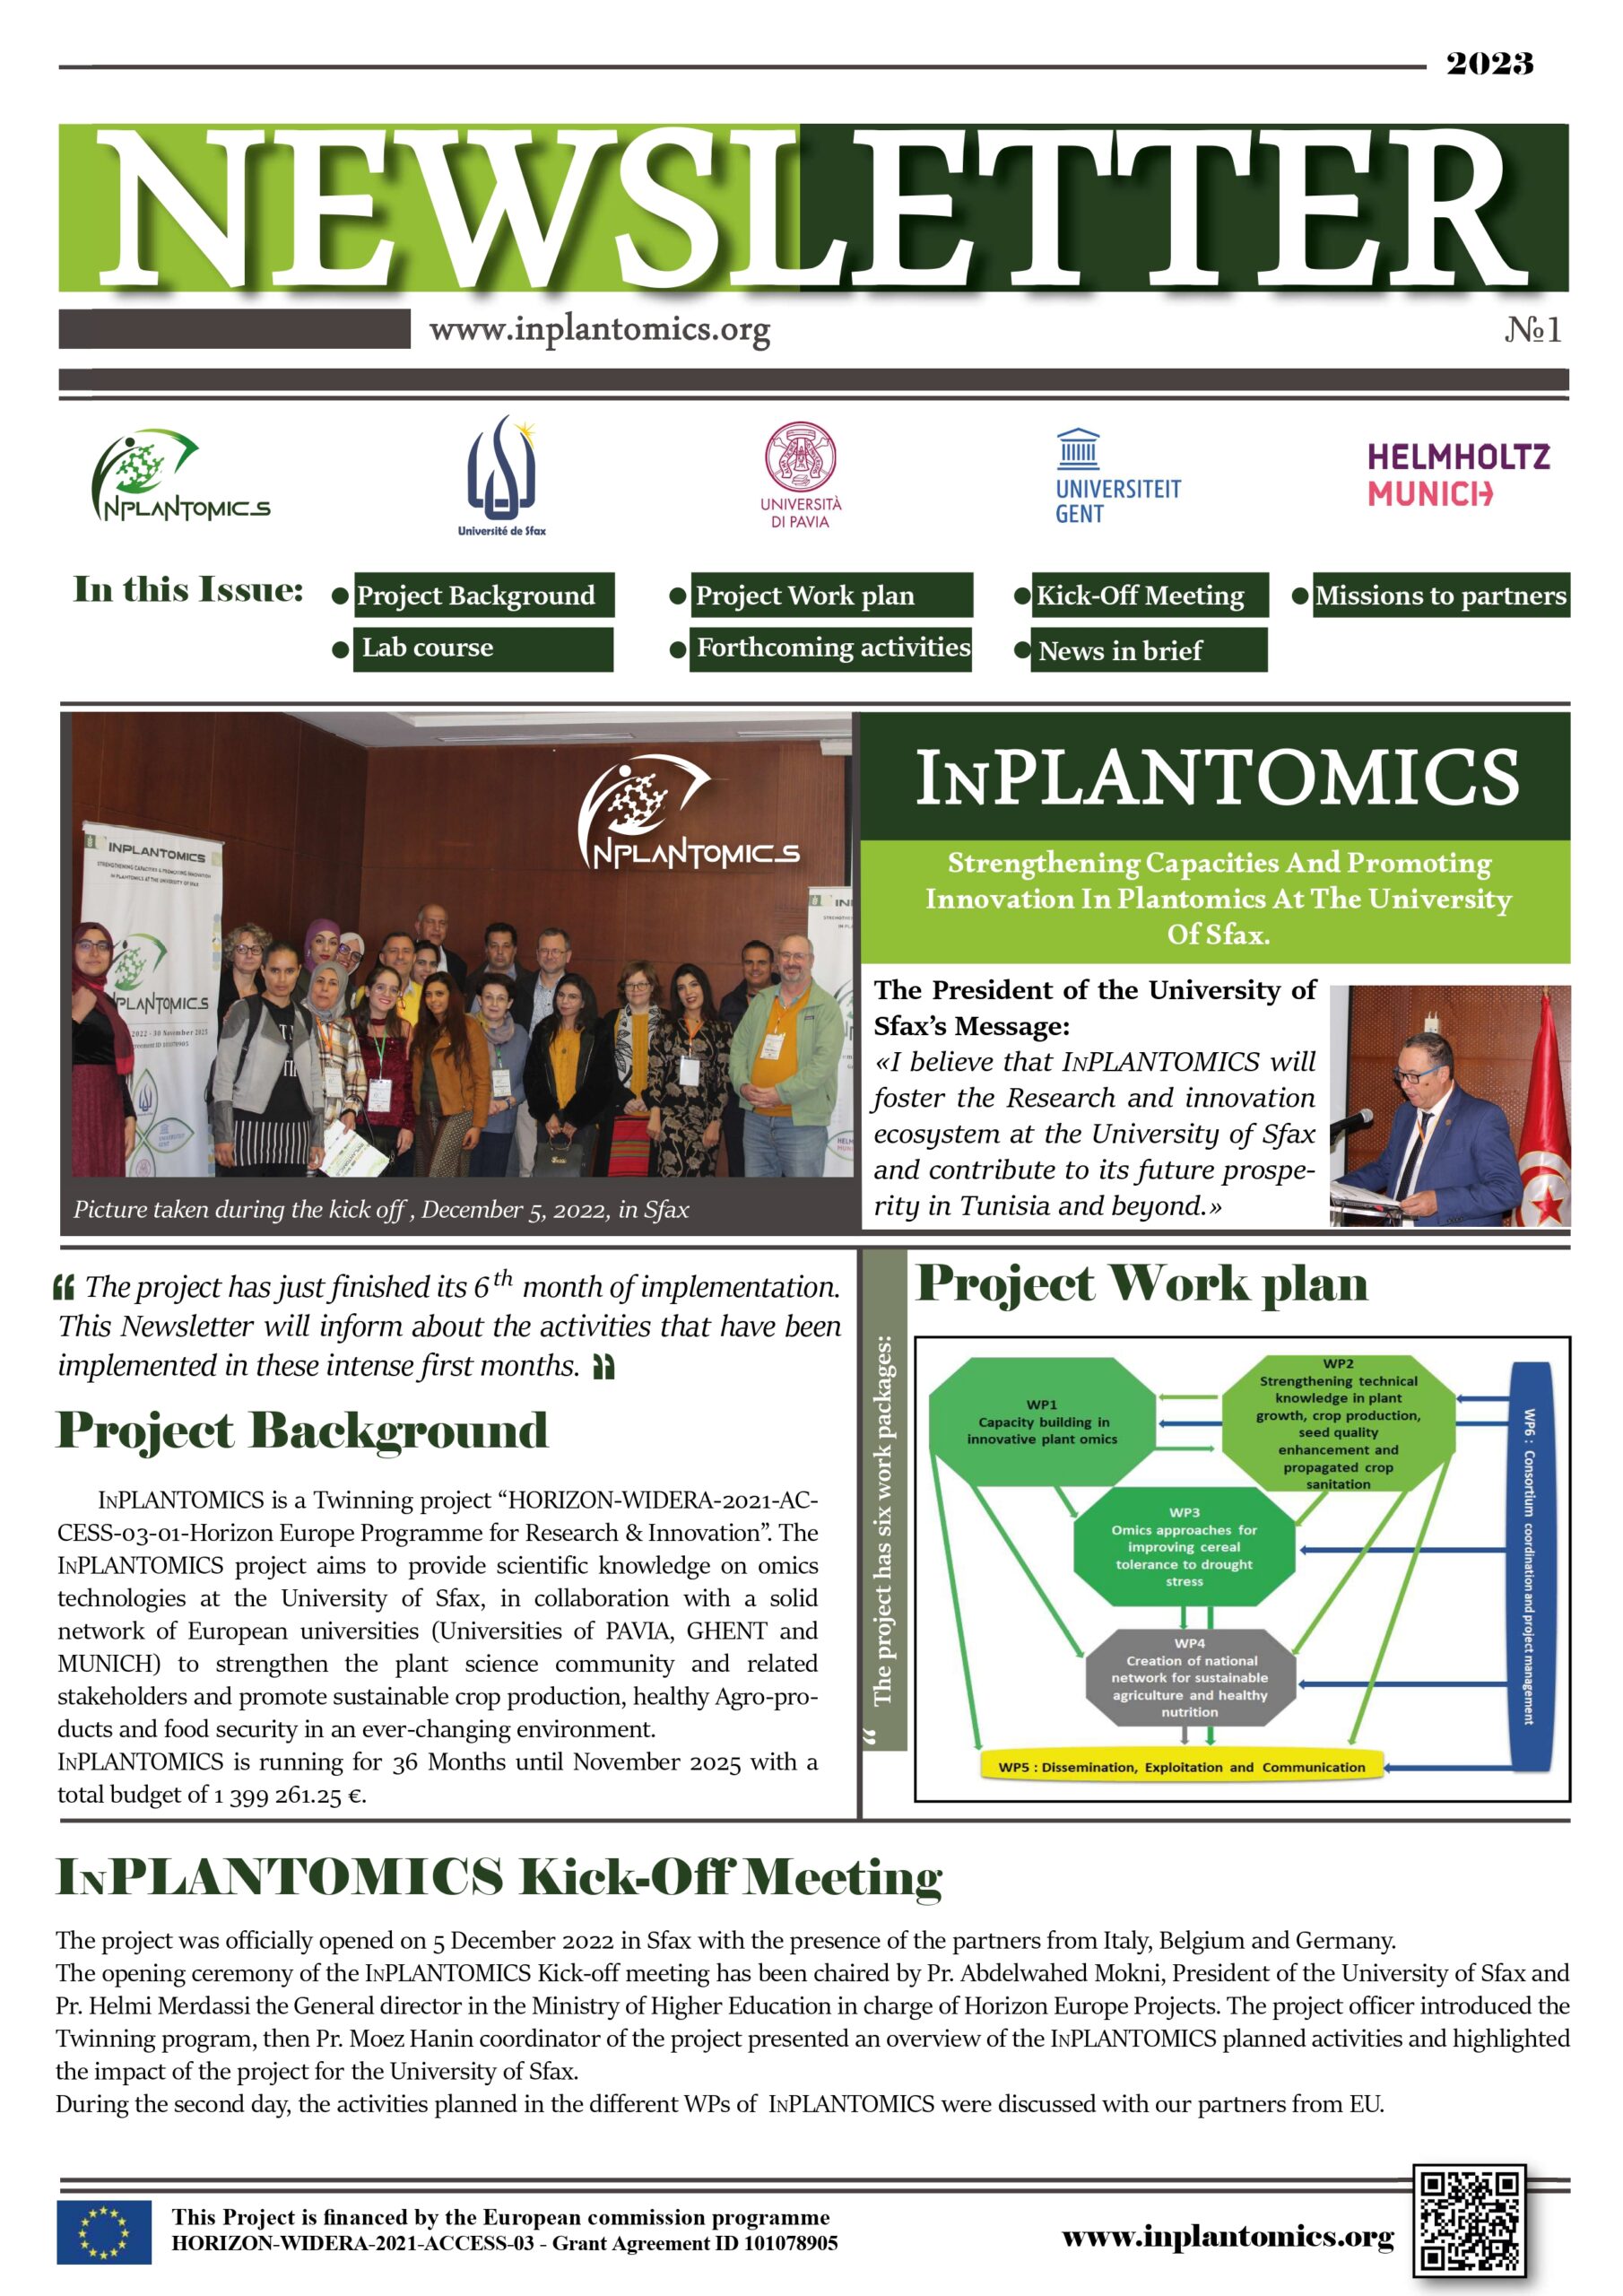 The First Edition of the InPLANTOMICS Newsletter